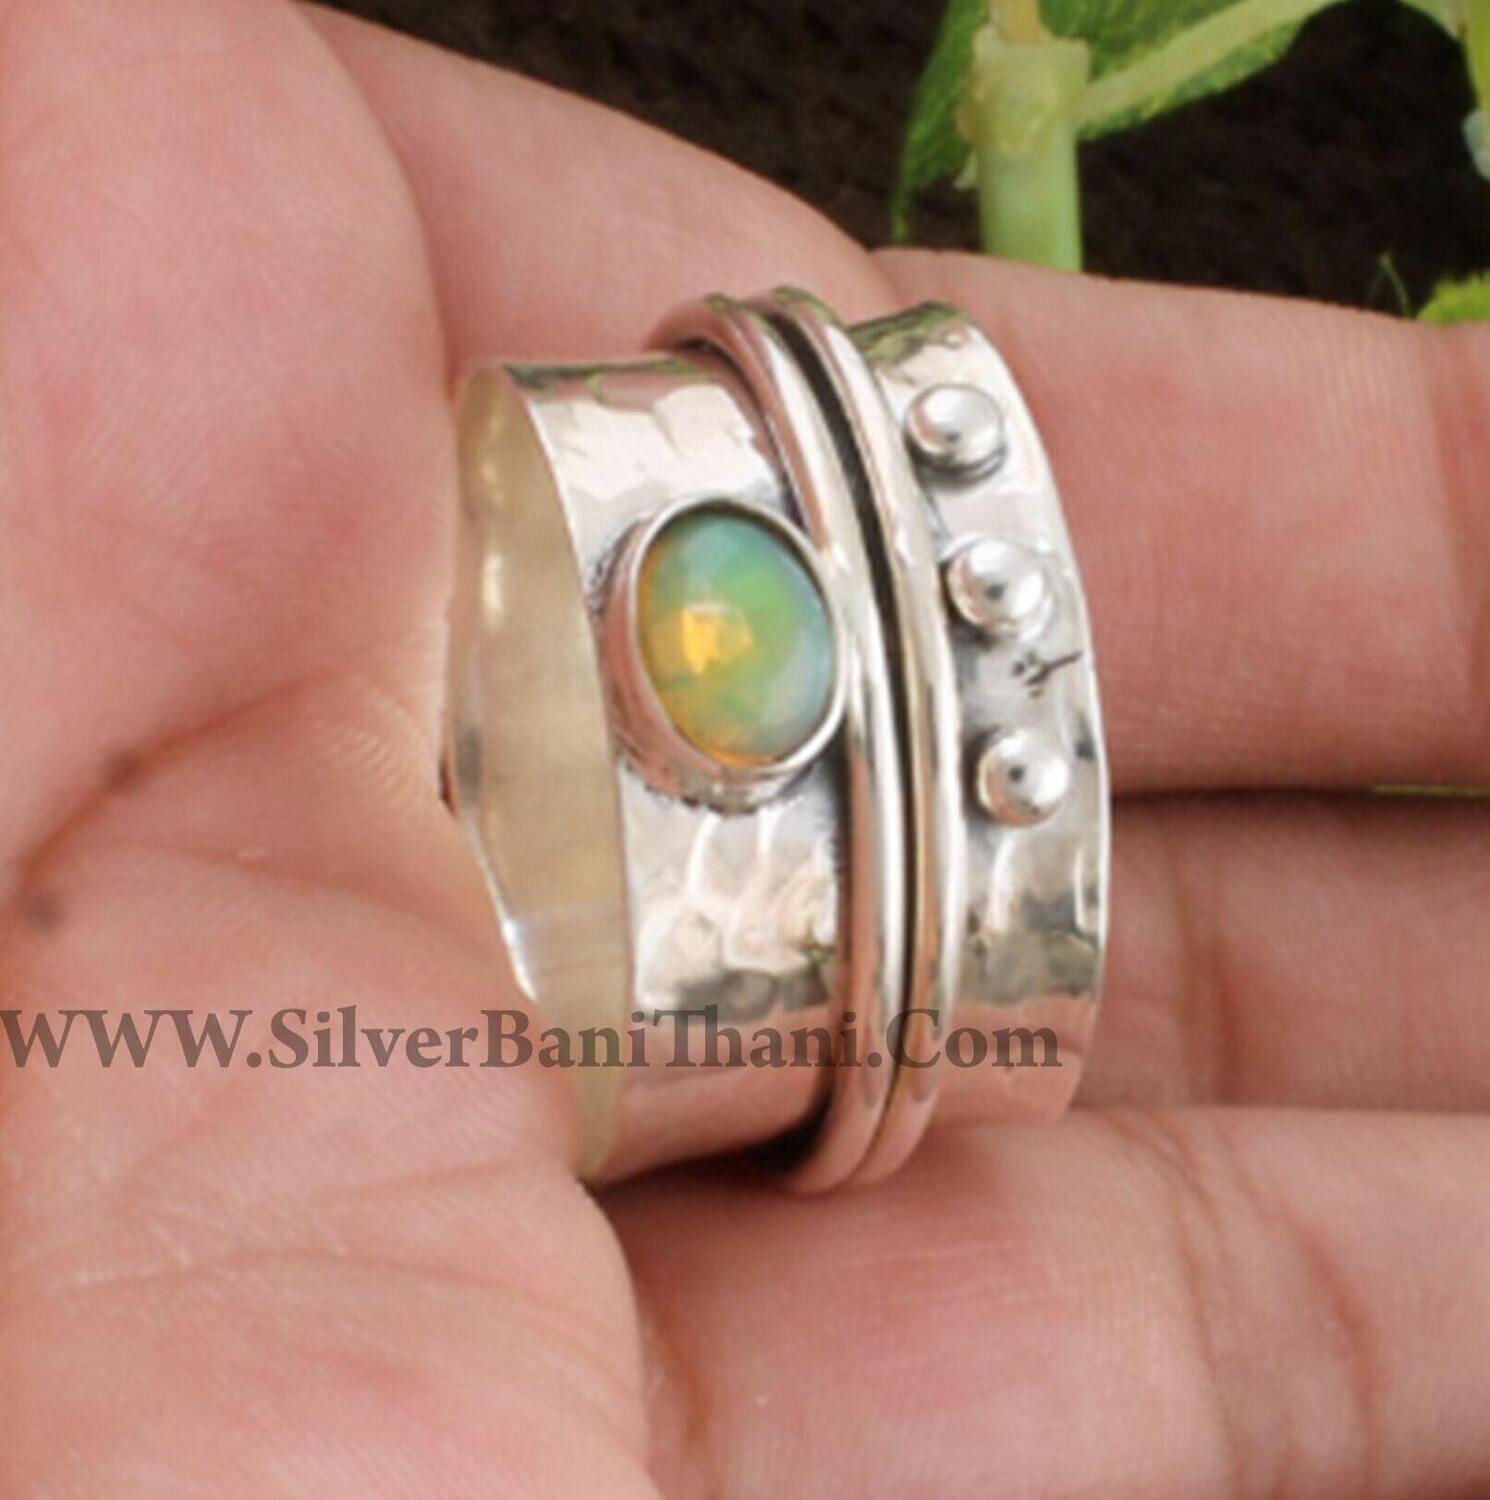 Opal Ring-Spinner Ring- 925 Sterling Silver Band Ring-Natural Ethiopian Opal Semi Precious Stone With Silver Spinner Band Ring Worry Ring